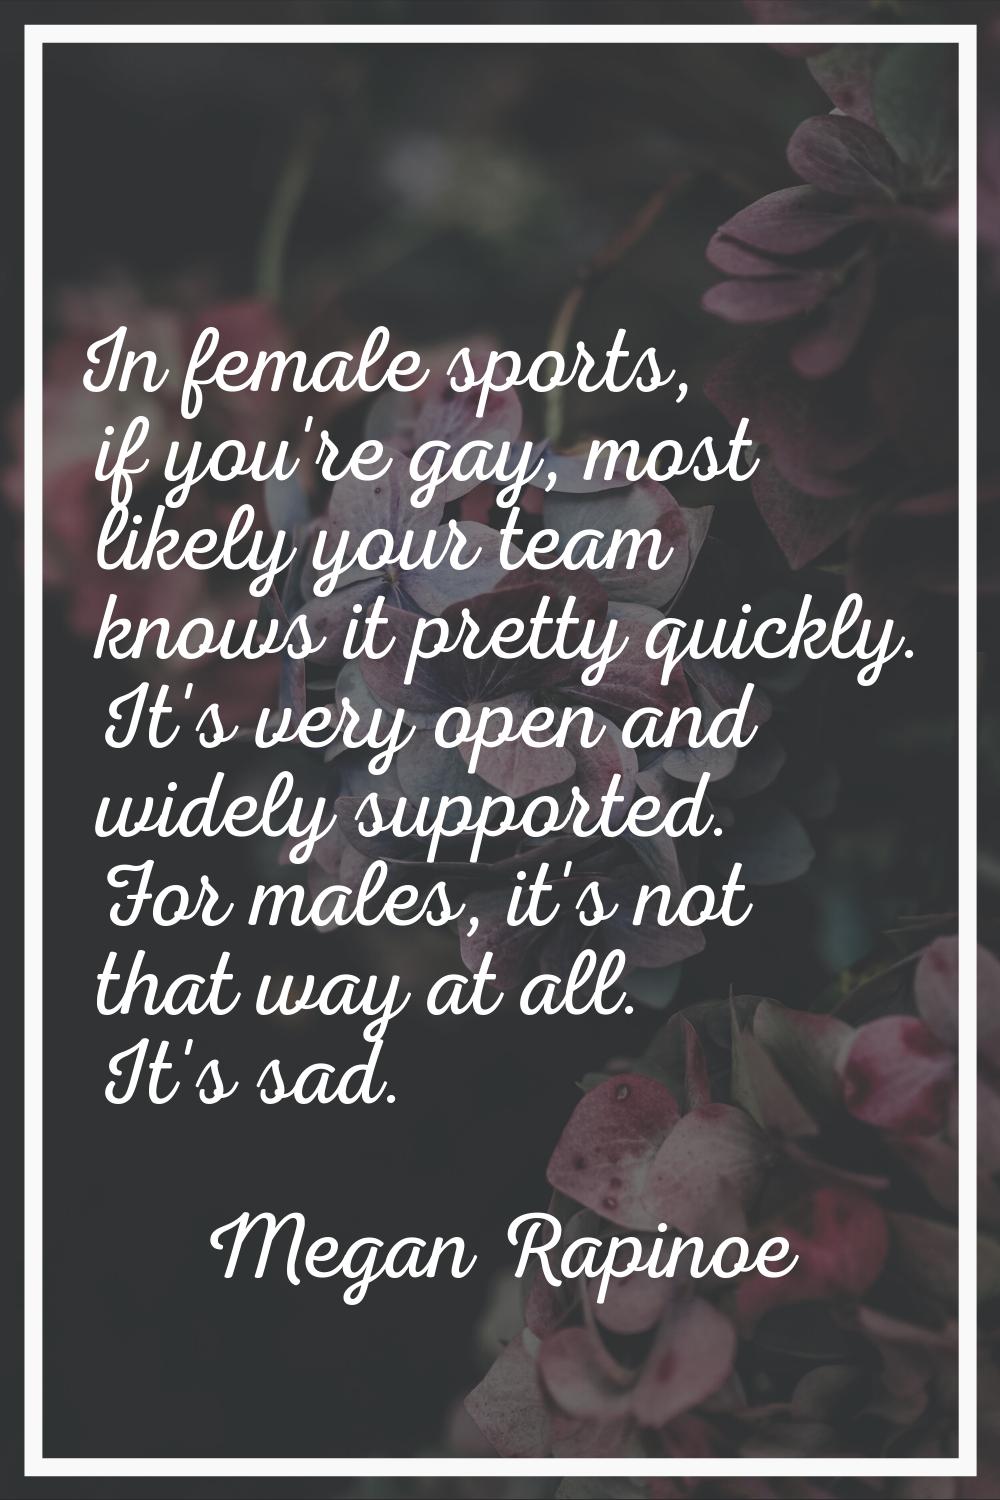 In female sports, if you're gay, most likely your team knows it pretty quickly. It's very open and 